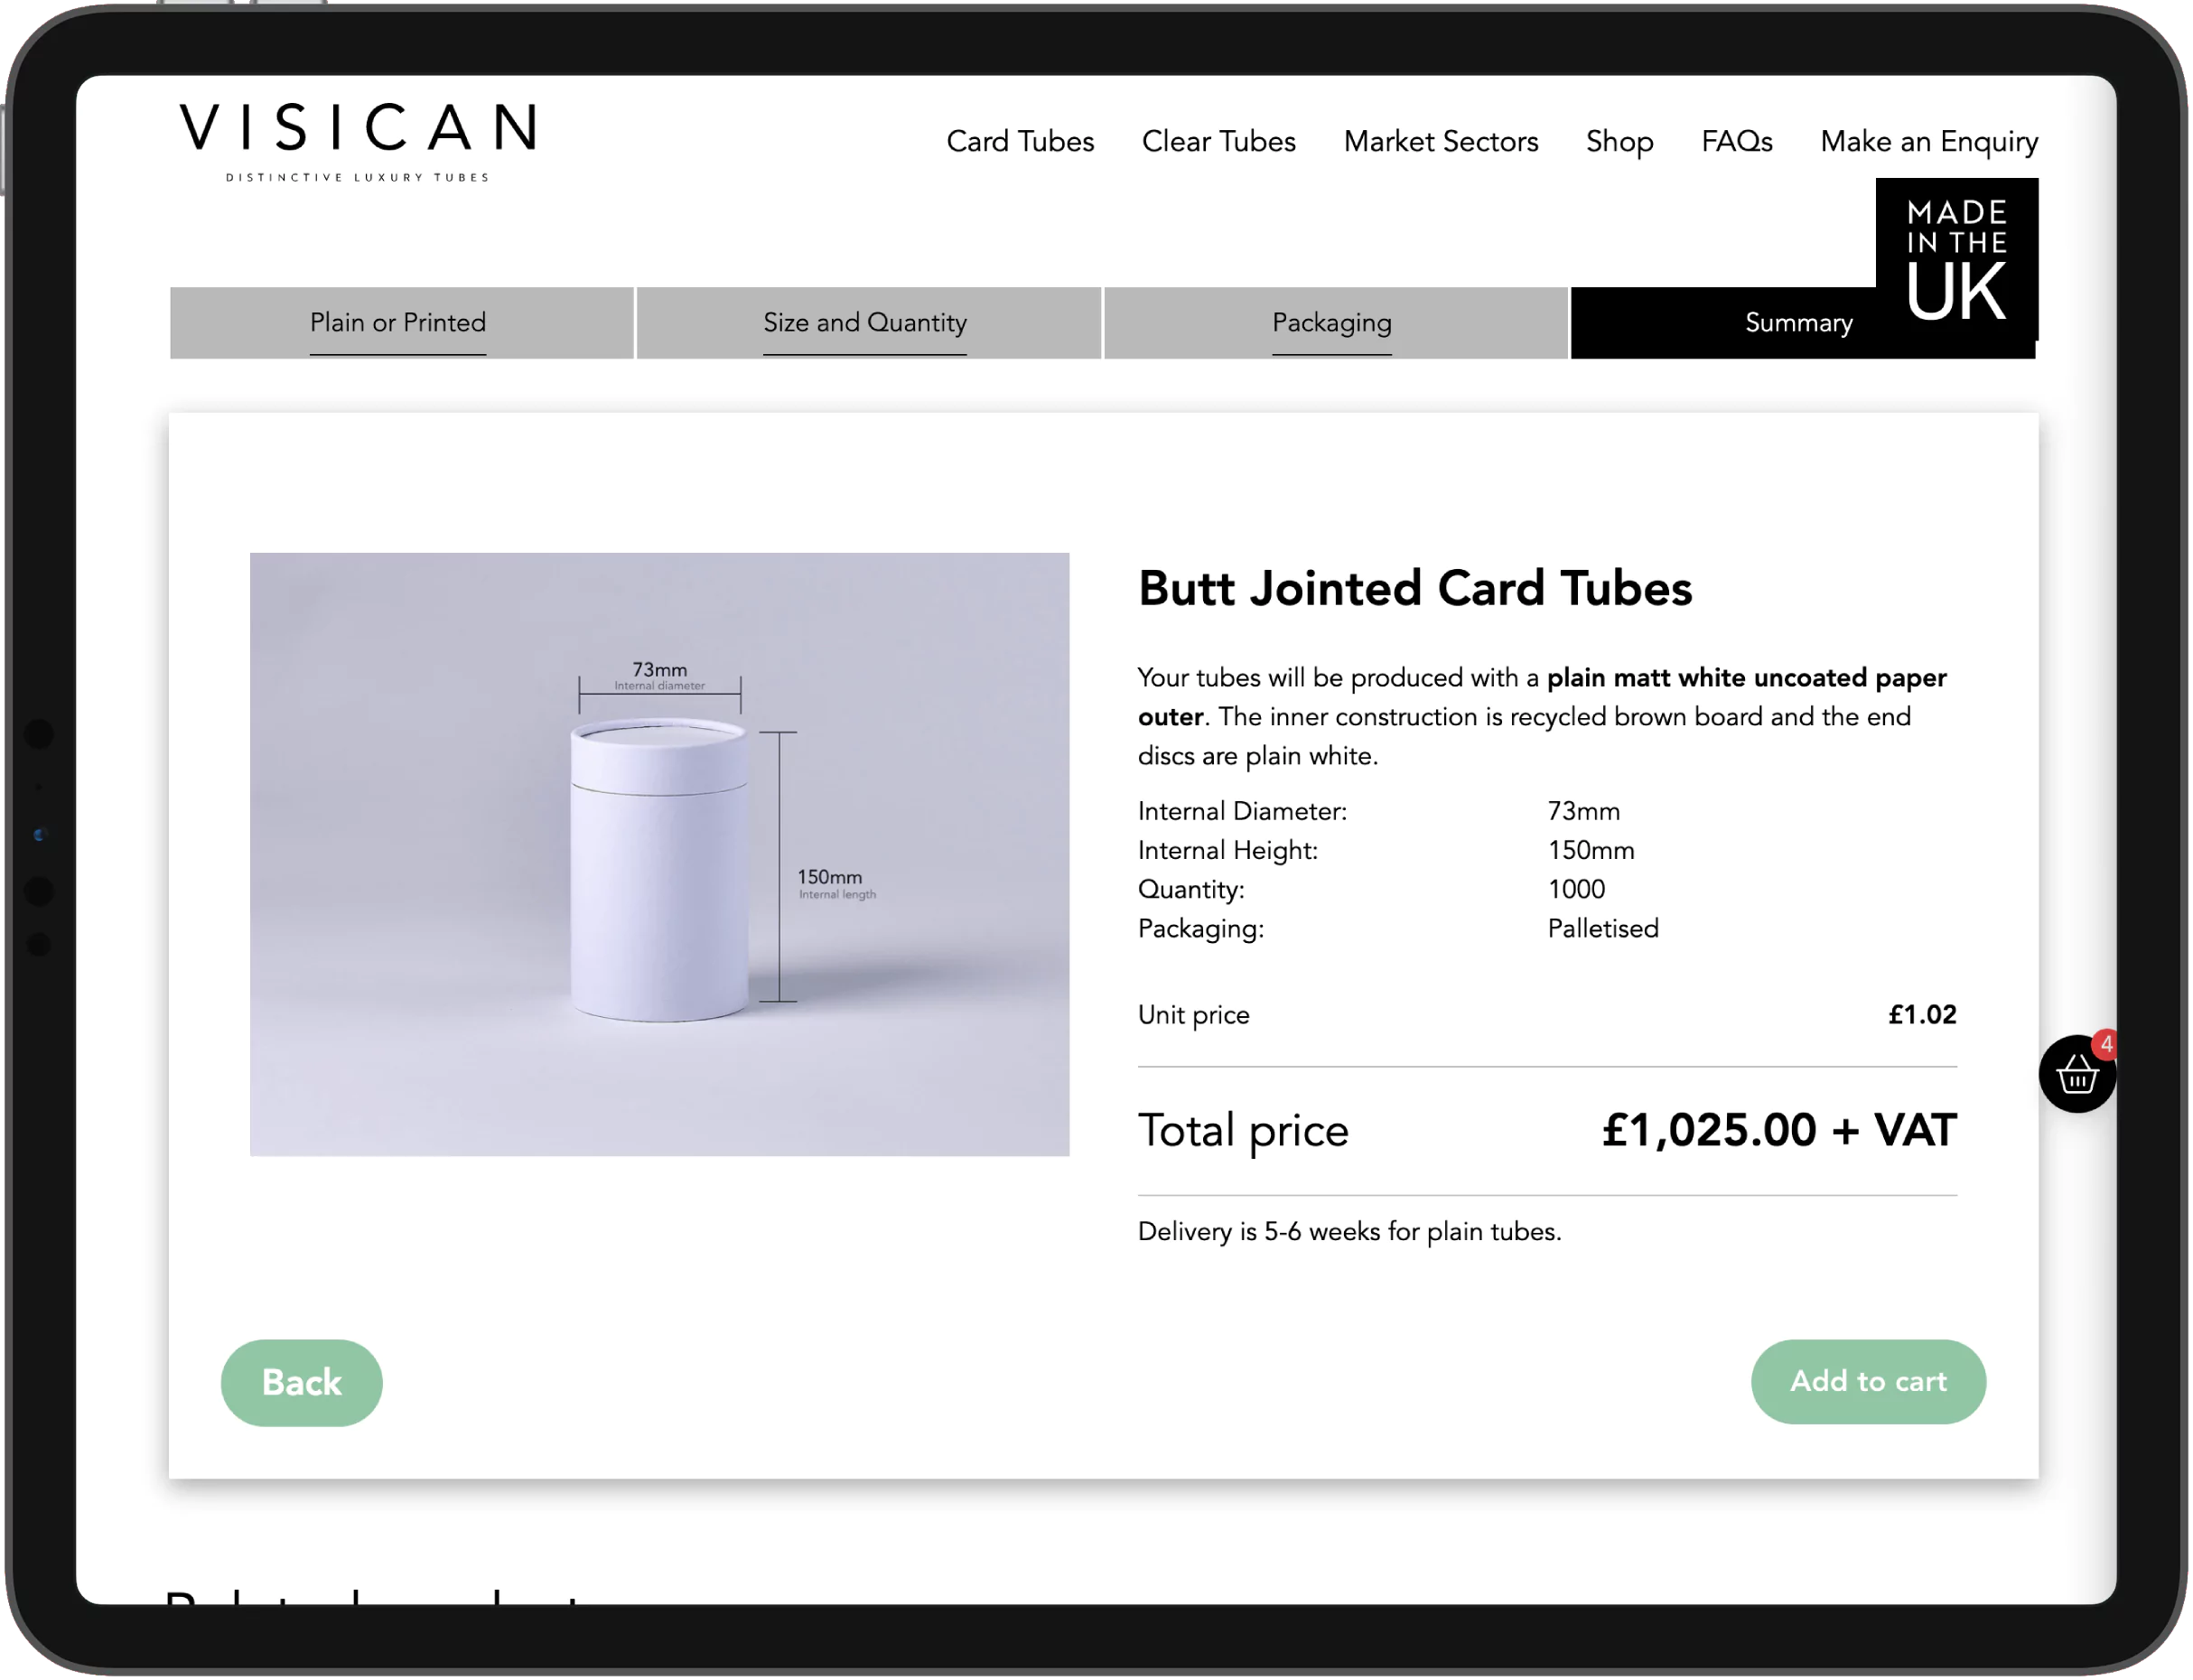 A screenshot of Visican's online shop summary page.